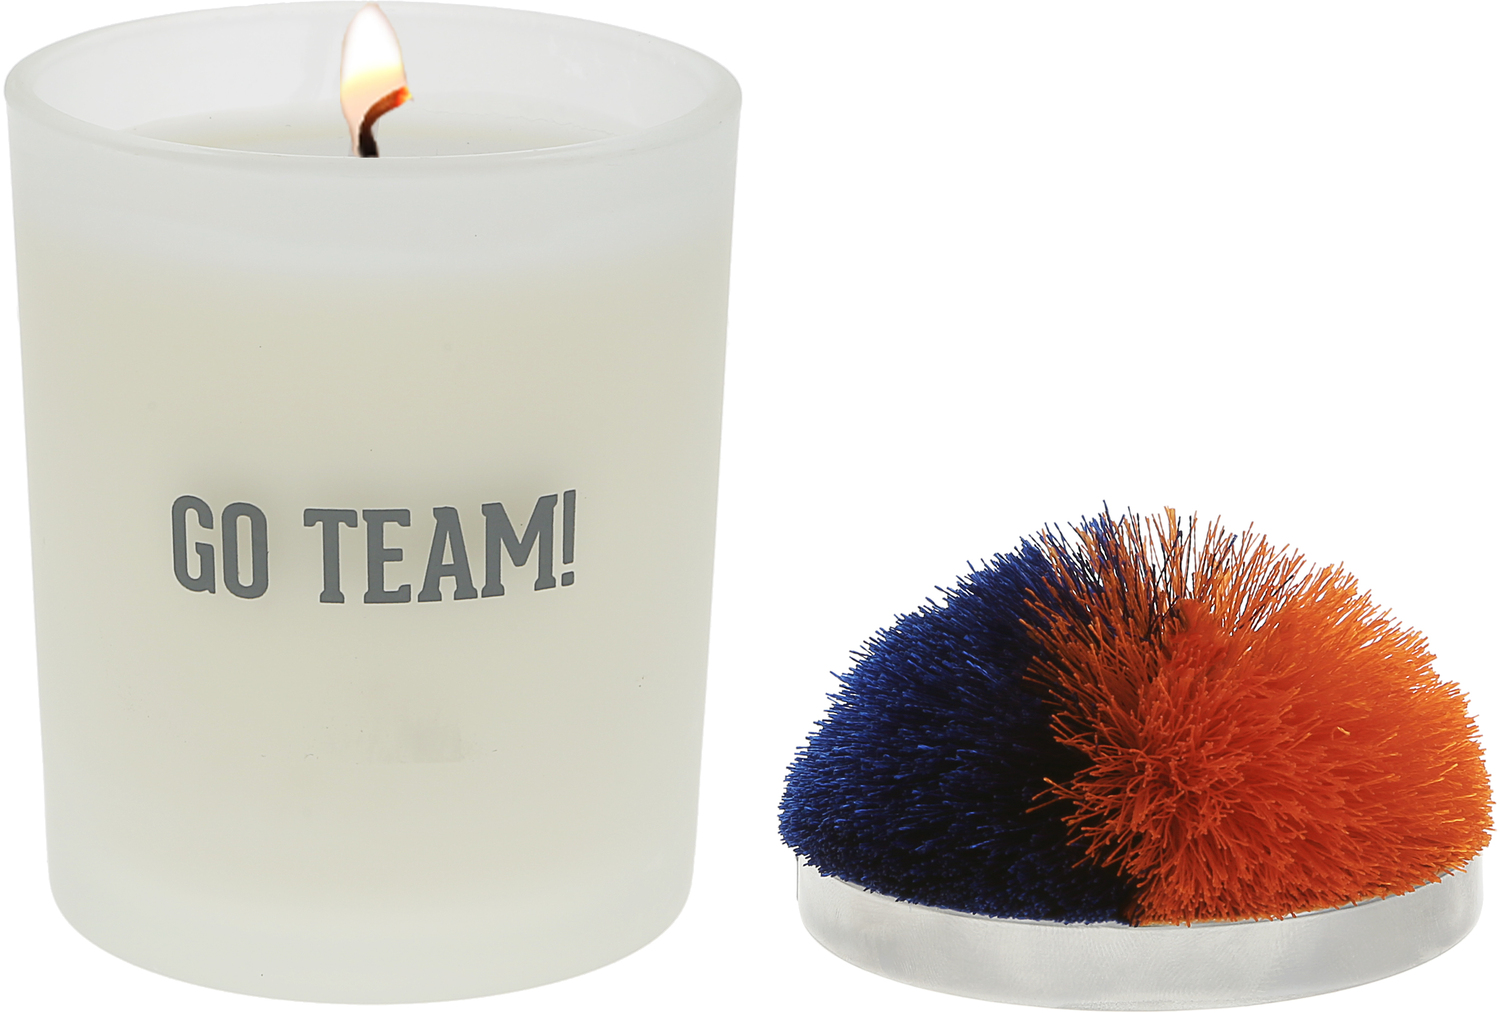 Go Team! - Blue & Orange by Repre-Scent - Go Team! - Blue & Orange - 5.5 oz - 100% Soy Wax Candle with Pom Pom Lid
Scent: Tranquility